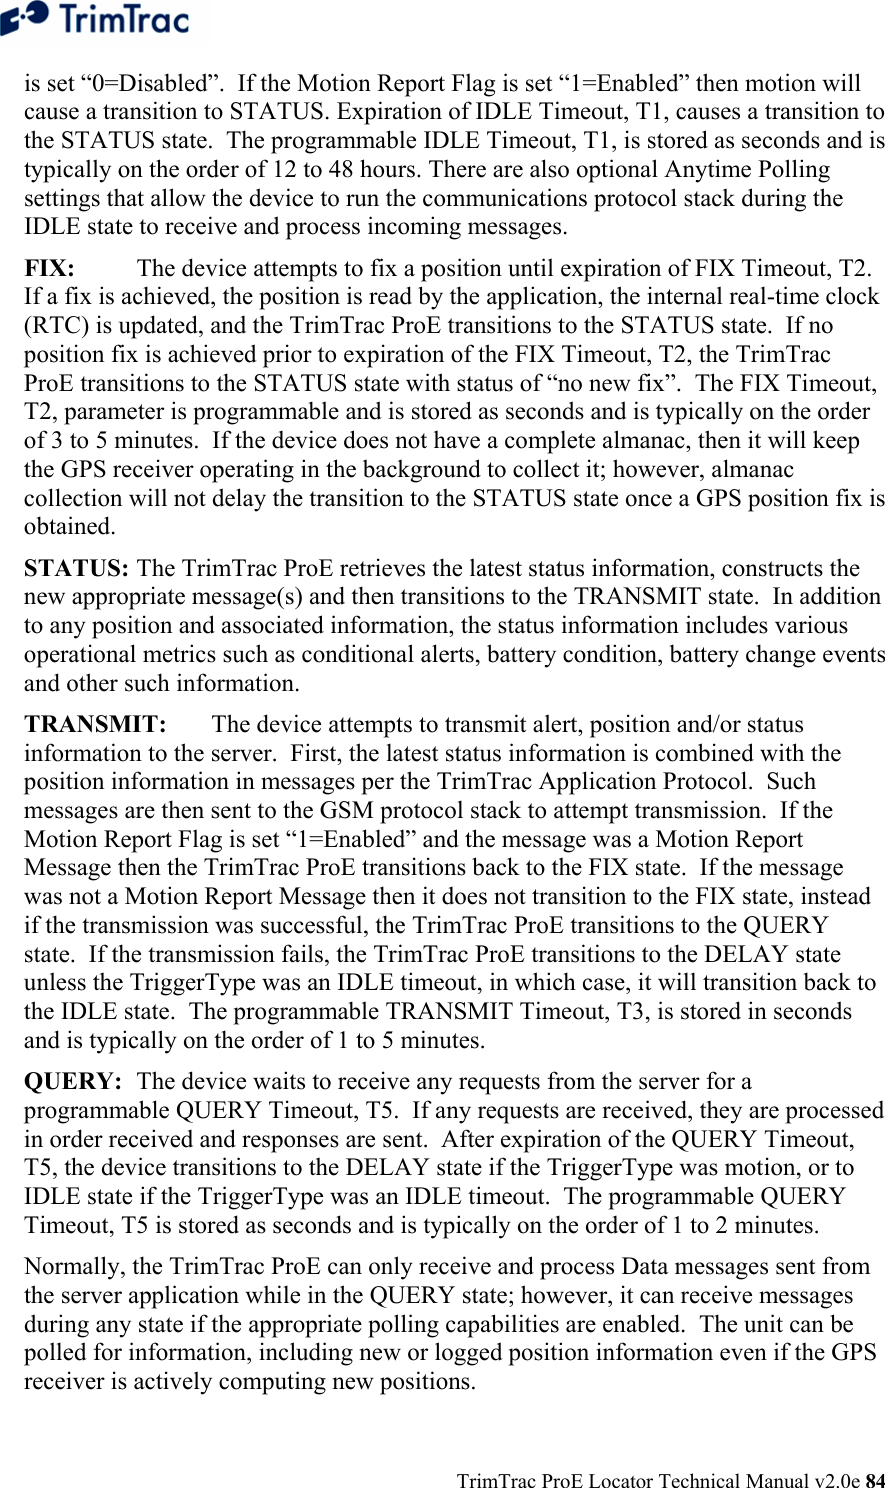  TrimTrac ProE Locator Technical Manual v2.0e 84 is set “0=Disabled”.  If the Motion Report Flag is set “1=Enabled” then motion will cause a transition to STATUS. Expiration of IDLE Timeout, T1, causes a transition to the STATUS state.  The programmable IDLE Timeout, T1, is stored as seconds and is typically on the order of 12 to 48 hours. There are also optional Anytime Polling settings that allow the device to run the communications protocol stack during the IDLE state to receive and process incoming messages. FIX:  The device attempts to fix a position until expiration of FIX Timeout, T2.  If a fix is achieved, the position is read by the application, the internal real-time clock (RTC) is updated, and the TrimTrac ProE transitions to the STATUS state.  If no position fix is achieved prior to expiration of the FIX Timeout, T2, the TrimTrac ProE transitions to the STATUS state with status of “no new fix”.  The FIX Timeout, T2, parameter is programmable and is stored as seconds and is typically on the order of 3 to 5 minutes.  If the device does not have a complete almanac, then it will keep the GPS receiver operating in the background to collect it; however, almanac collection will not delay the transition to the STATUS state once a GPS position fix is obtained. STATUS: The TrimTrac ProE retrieves the latest status information, constructs the new appropriate message(s) and then transitions to the TRANSMIT state.  In addition to any position and associated information, the status information includes various operational metrics such as conditional alerts, battery condition, battery change events and other such information. TRANSMIT:  The device attempts to transmit alert, position and/or status information to the server.  First, the latest status information is combined with the position information in messages per the TrimTrac Application Protocol.  Such messages are then sent to the GSM protocol stack to attempt transmission.  If the Motion Report Flag is set “1=Enabled” and the message was a Motion Report Message then the TrimTrac ProE transitions back to the FIX state.  If the message was not a Motion Report Message then it does not transition to the FIX state, instead if the transmission was successful, the TrimTrac ProE transitions to the QUERY state.  If the transmission fails, the TrimTrac ProE transitions to the DELAY state unless the TriggerType was an IDLE timeout, in which case, it will transition back to the IDLE state.  The programmable TRANSMIT Timeout, T3, is stored in seconds and is typically on the order of 1 to 5 minutes. QUERY:  The device waits to receive any requests from the server for a programmable QUERY Timeout, T5.  If any requests are received, they are processed in order received and responses are sent.  After expiration of the QUERY Timeout, T5, the device transitions to the DELAY state if the TriggerType was motion, or to IDLE state if the TriggerType was an IDLE timeout.  The programmable QUERY Timeout, T5 is stored as seconds and is typically on the order of 1 to 2 minutes. Normally, the TrimTrac ProE can only receive and process Data messages sent from the server application while in the QUERY state; however, it can receive messages during any state if the appropriate polling capabilities are enabled.  The unit can be polled for information, including new or logged position information even if the GPS receiver is actively computing new positions. 